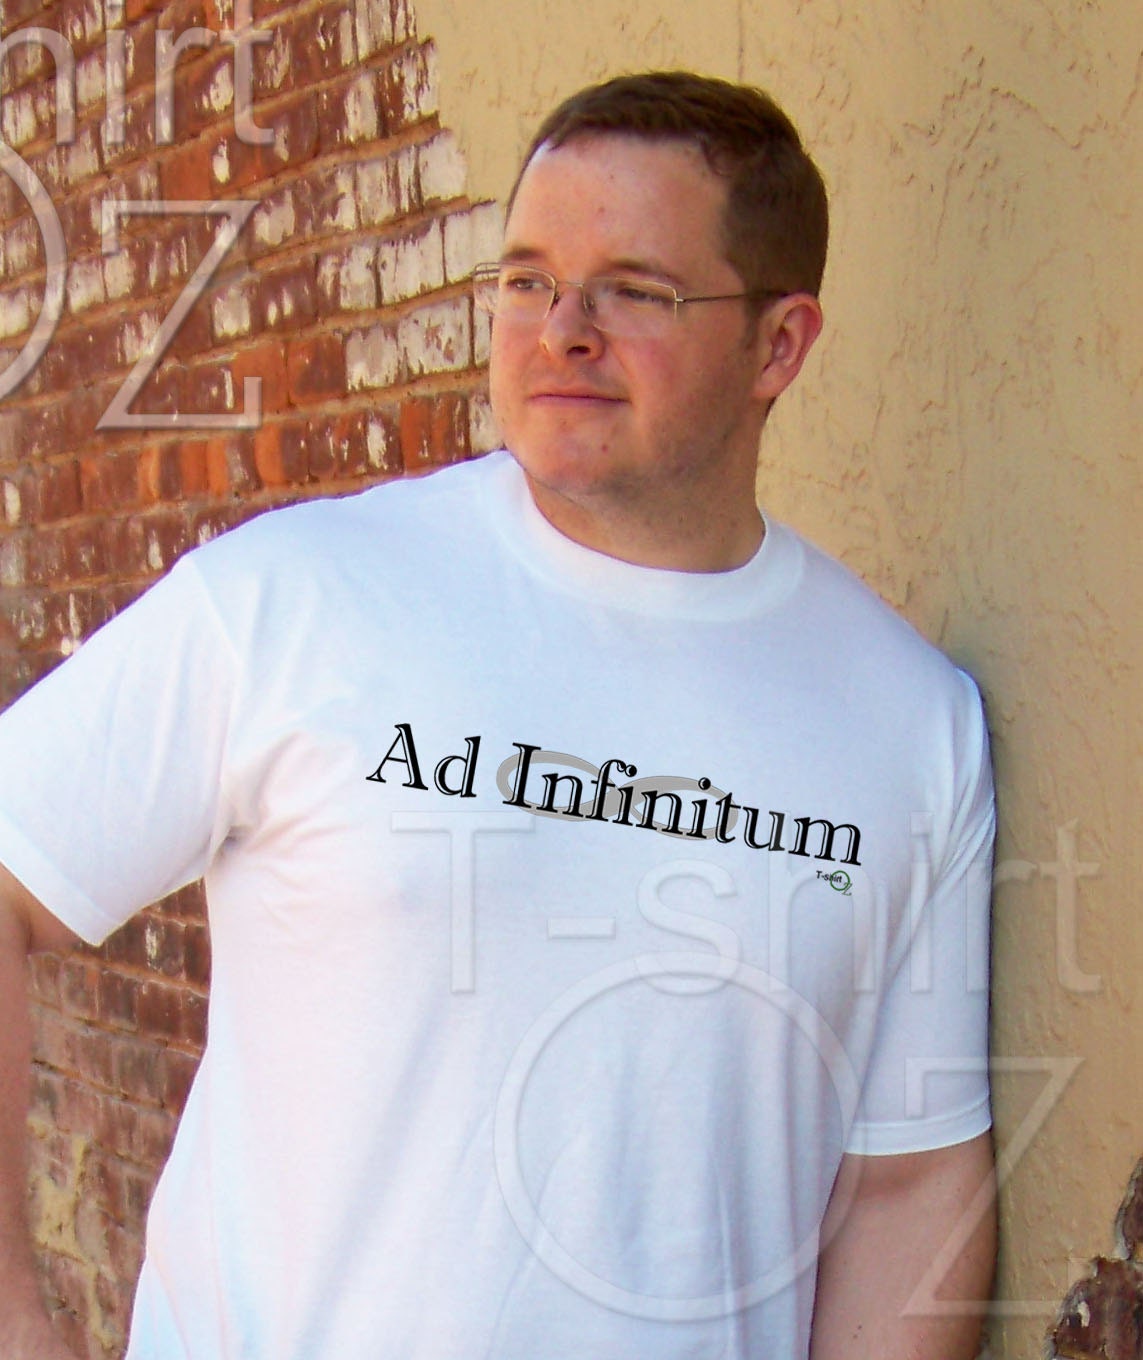 ad infinitum meaning